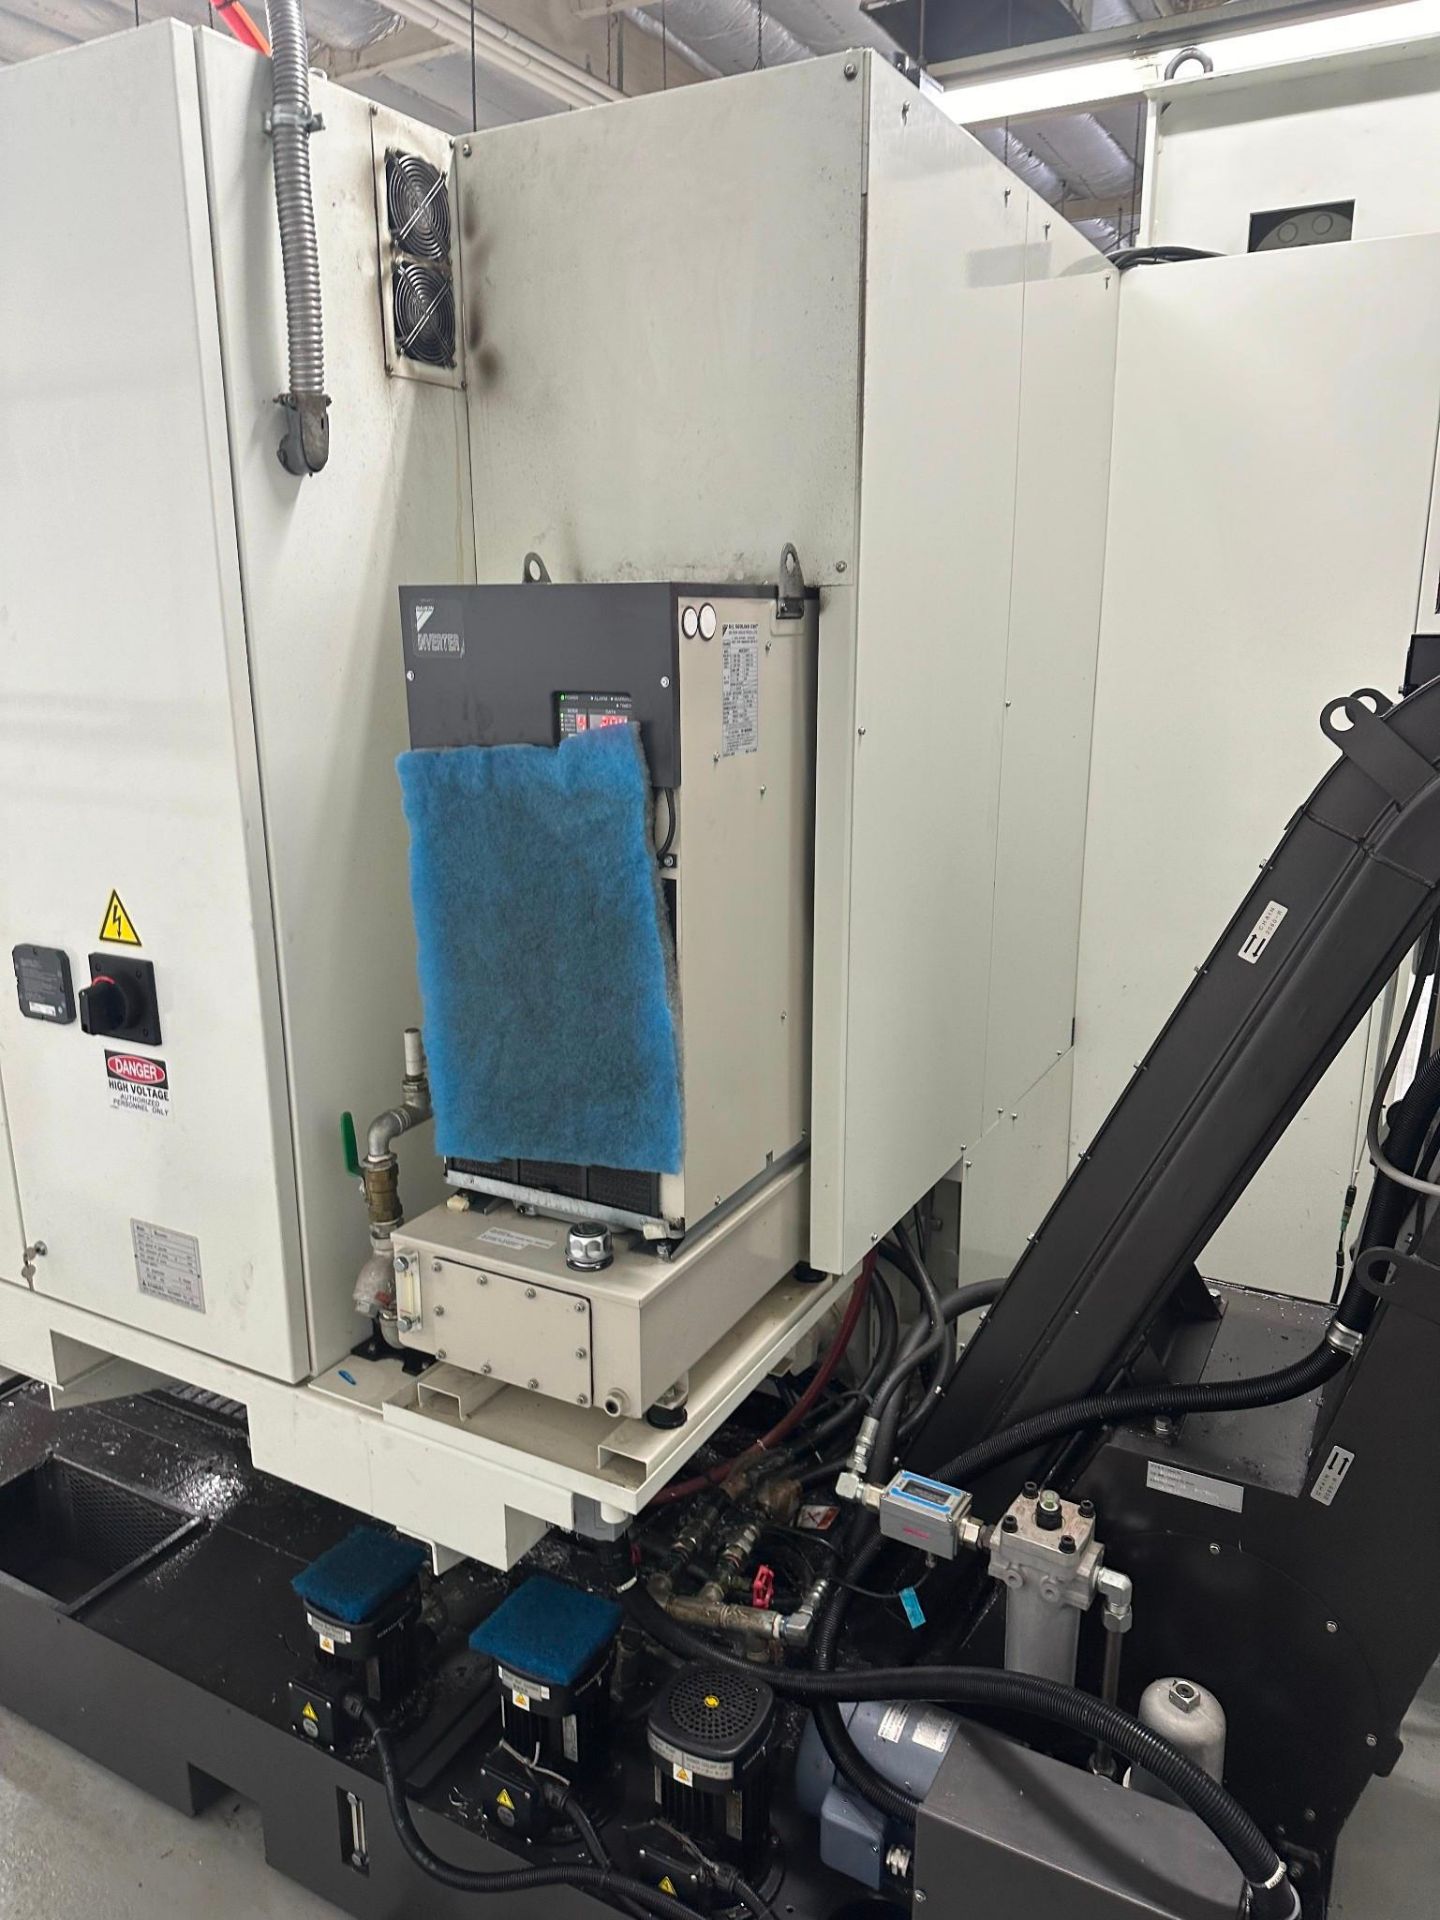 KITAMURA MYCENTER HX400IG HMC, 2018 - FULL 4TH AXIS, CTS, LINEAR SCALES - Image 11 of 17